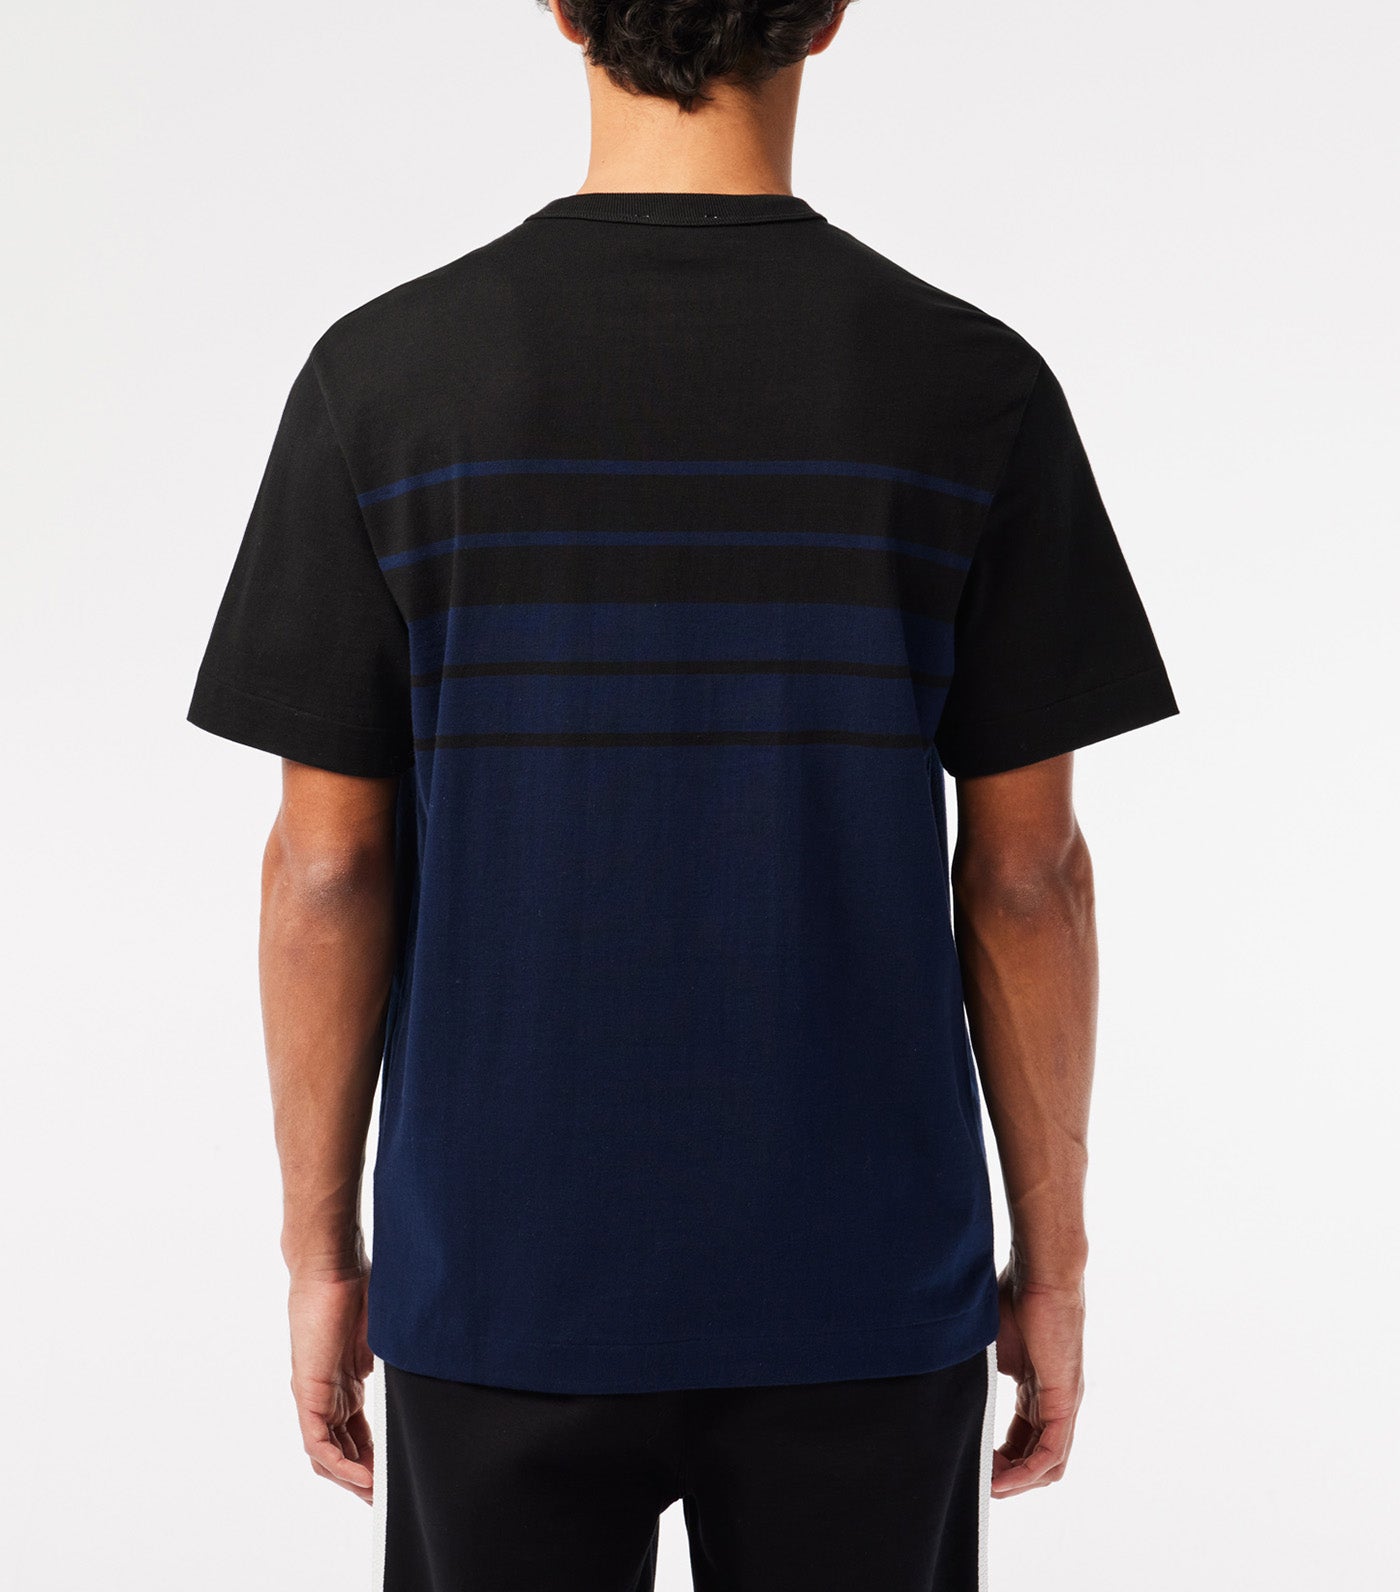 French Made Striped Jersey T-Shirt Navy Blue/Black